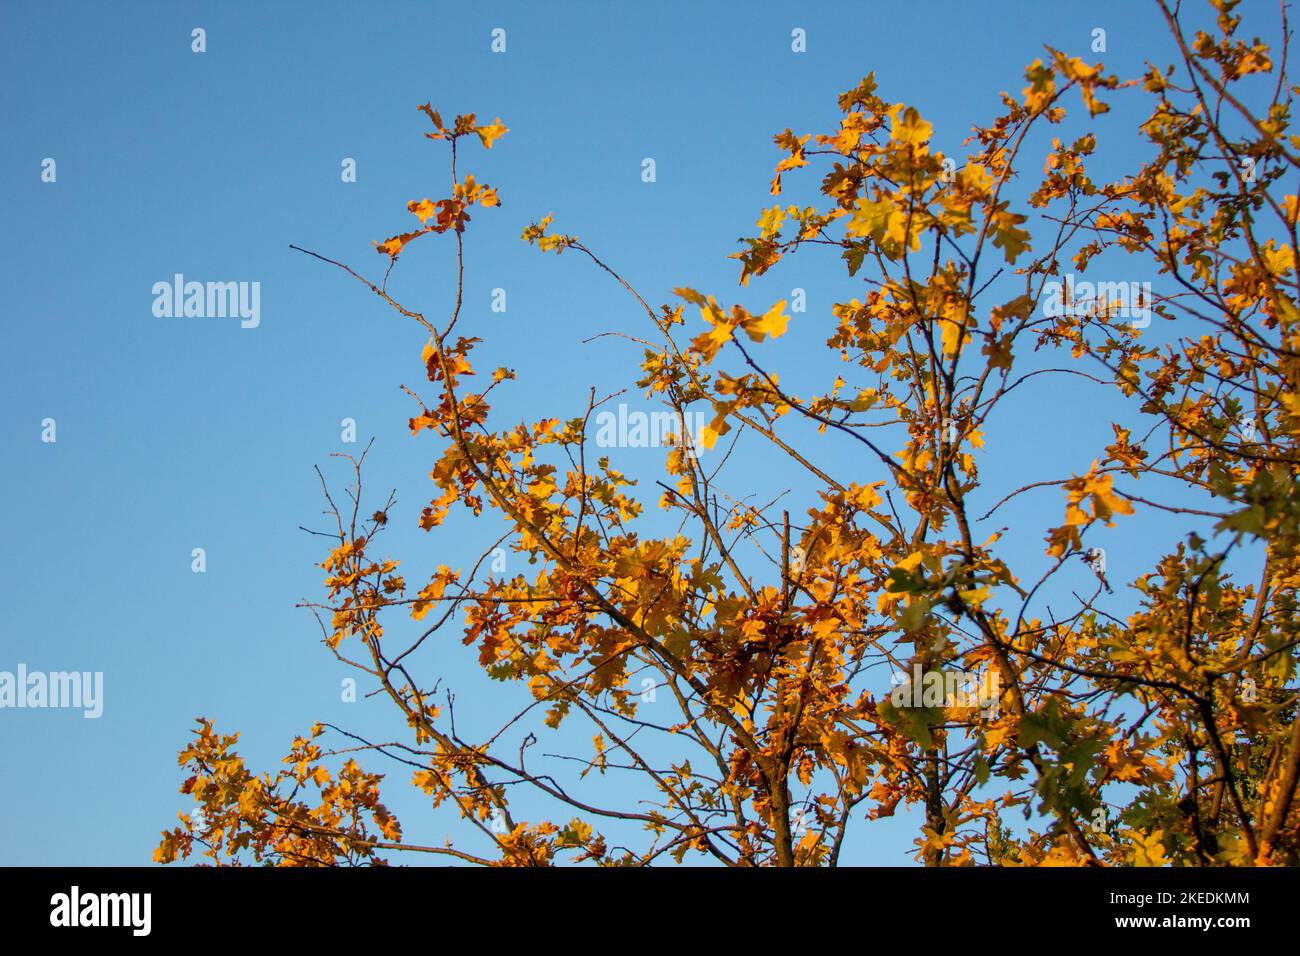 yellow autumn leaves on tree branches against a blue sky Stock Photo